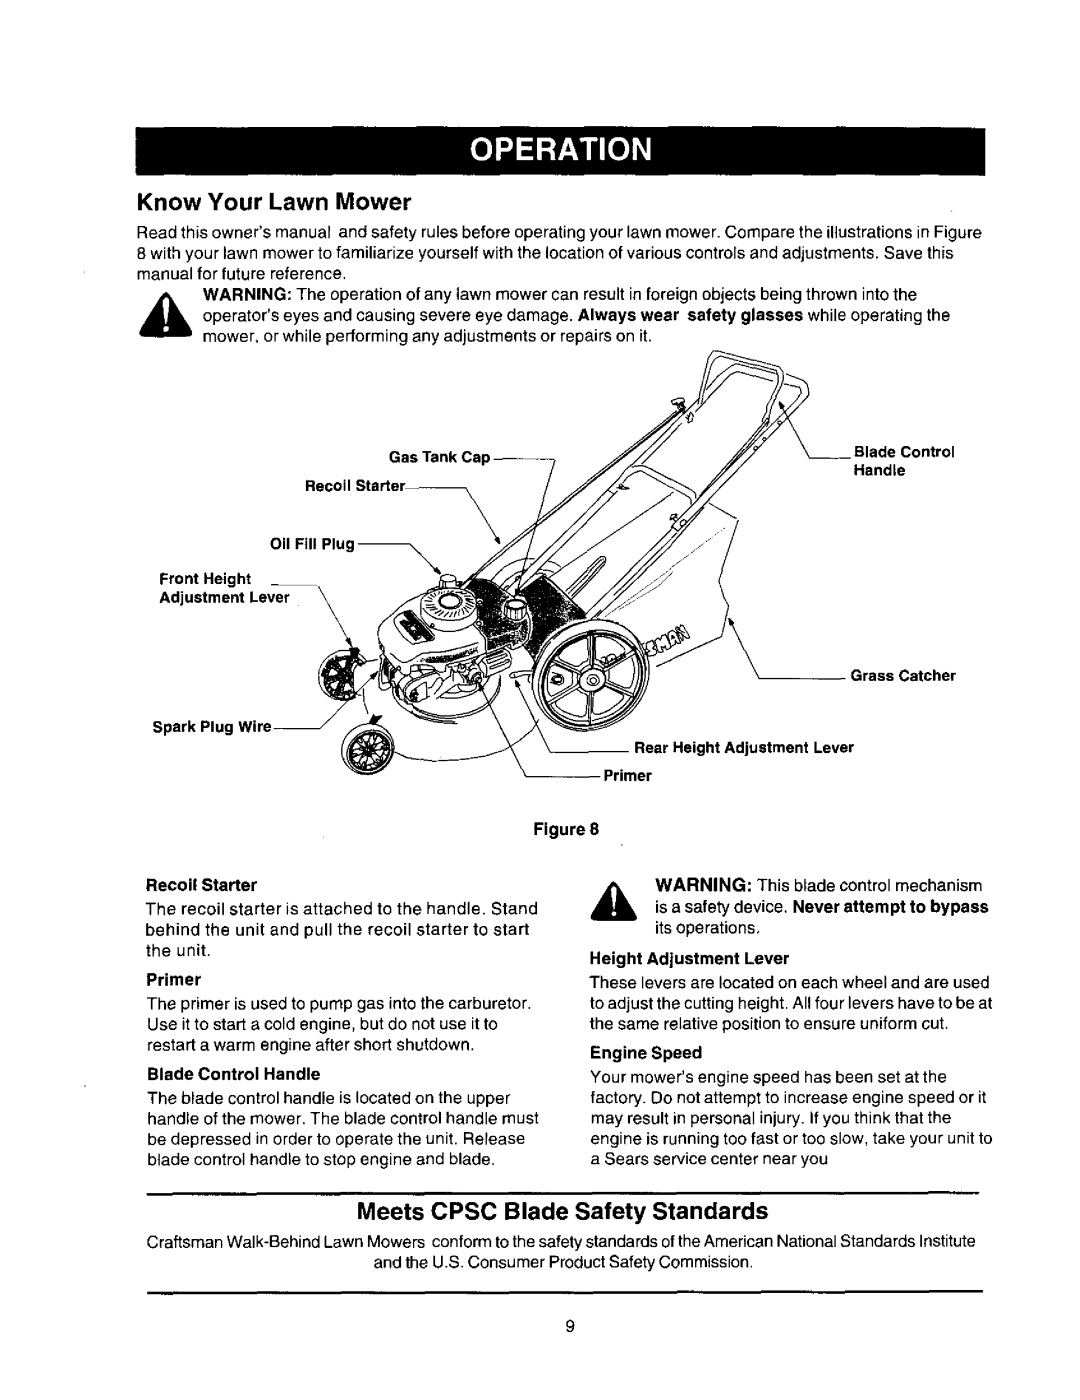 Craftsman 247.388250 owner manual Know Your Lawn Mower, Meets CPSC Blade Safety Standards 